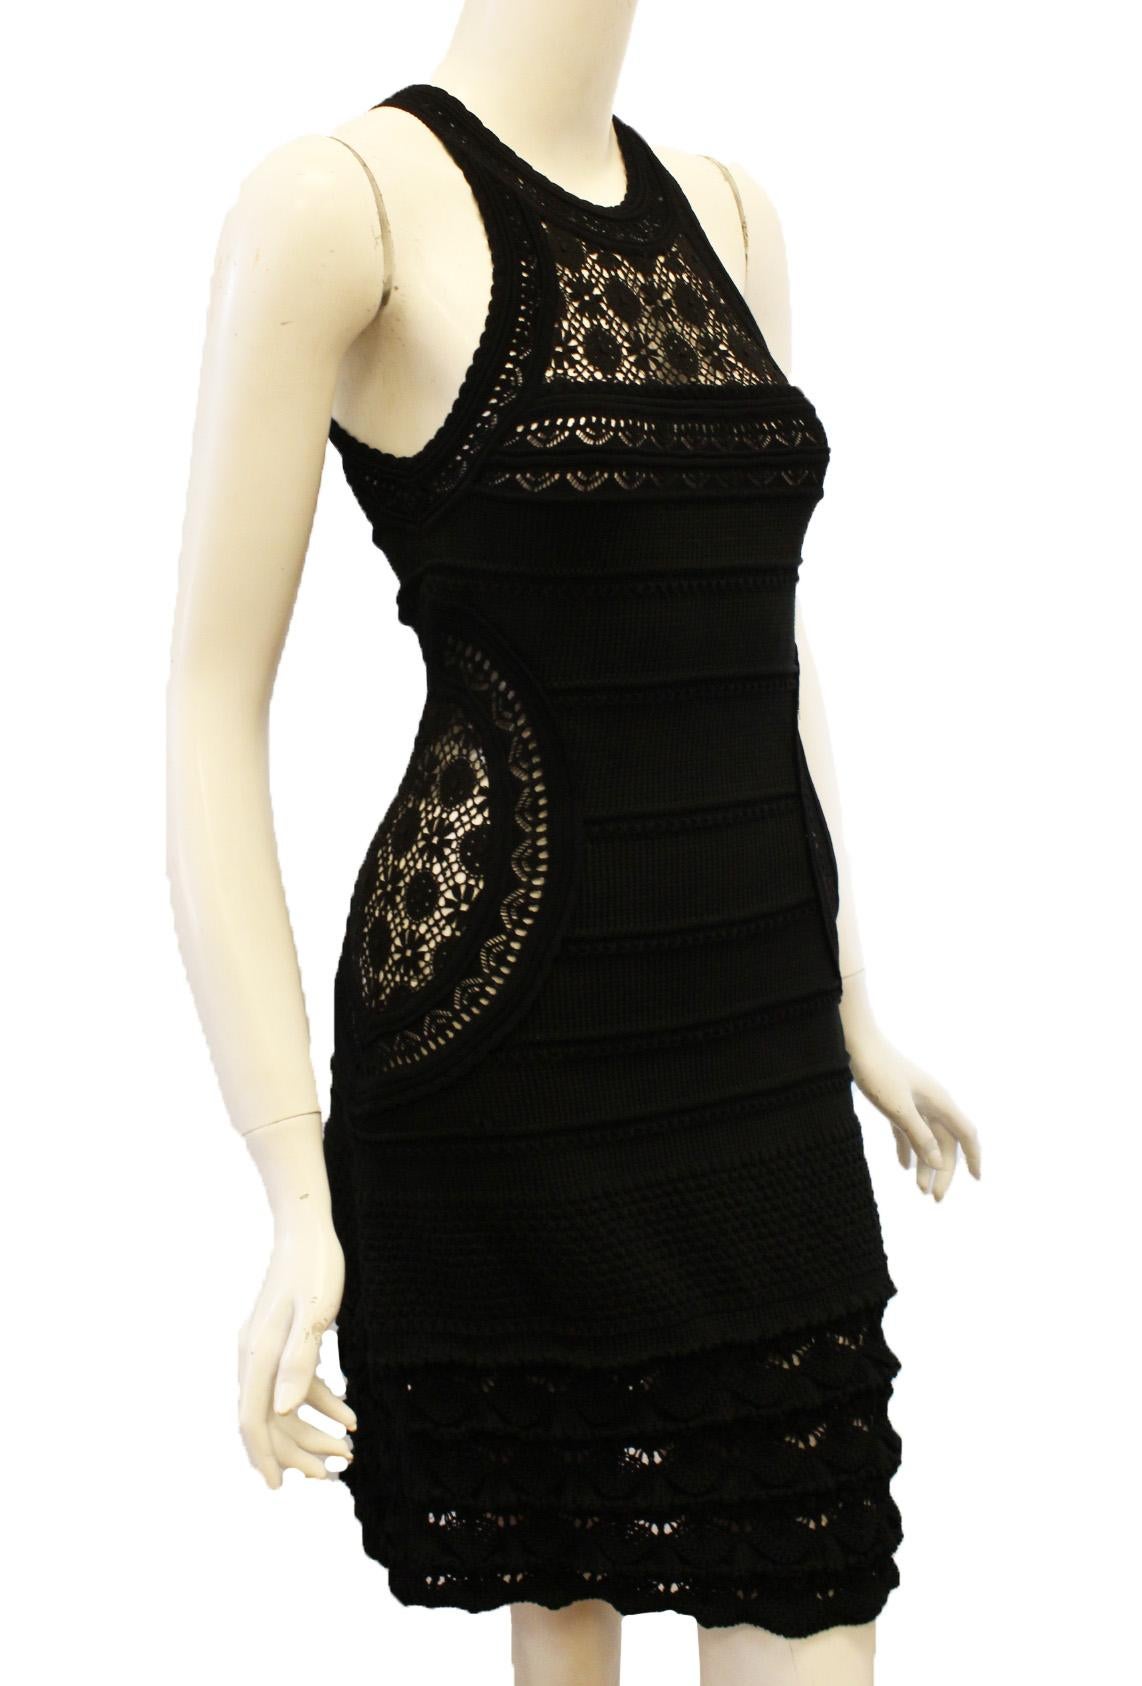 Roberto Cavalli black cotton open crochet sleeveless dress is fantastic for the summer days and night.  Artistically designed and crafted for ease and fashion.  The hem is scalloped and finishes the multi tier ruffles along hemline.  The front and